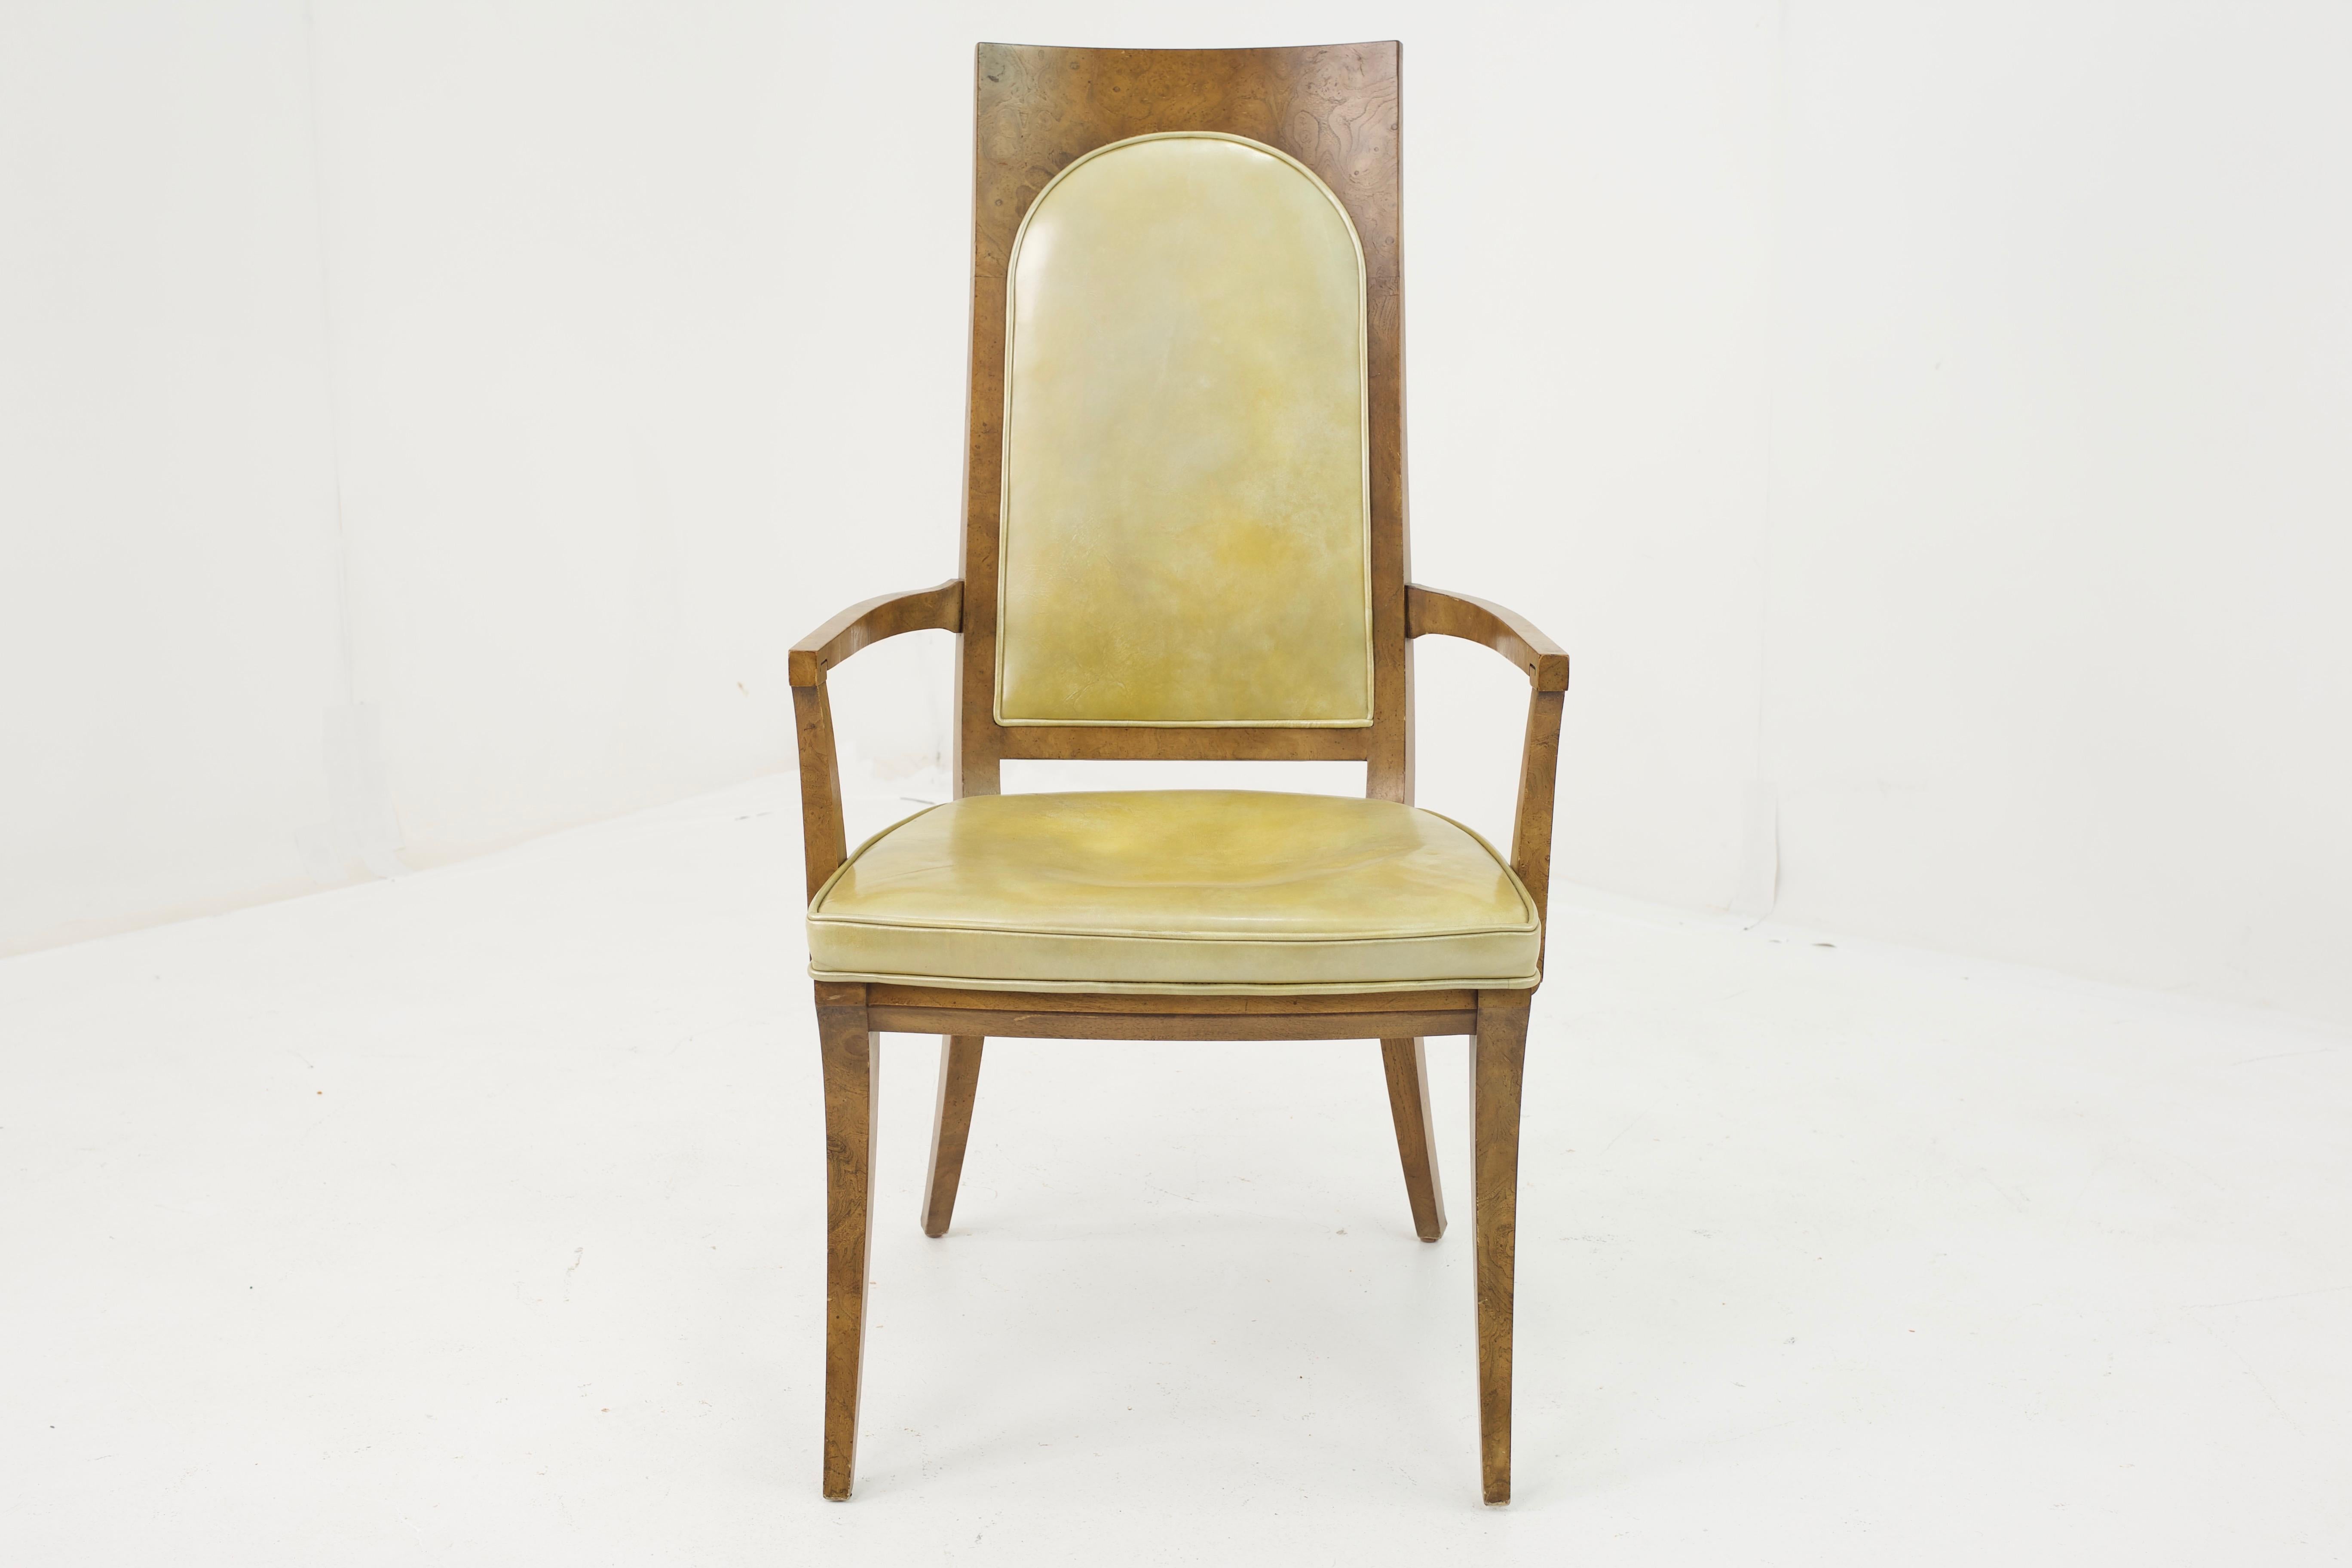 Mastercraft Mid Century Burlwood Dining Chairs - Set of 6 In Excellent Condition For Sale In Countryside, IL